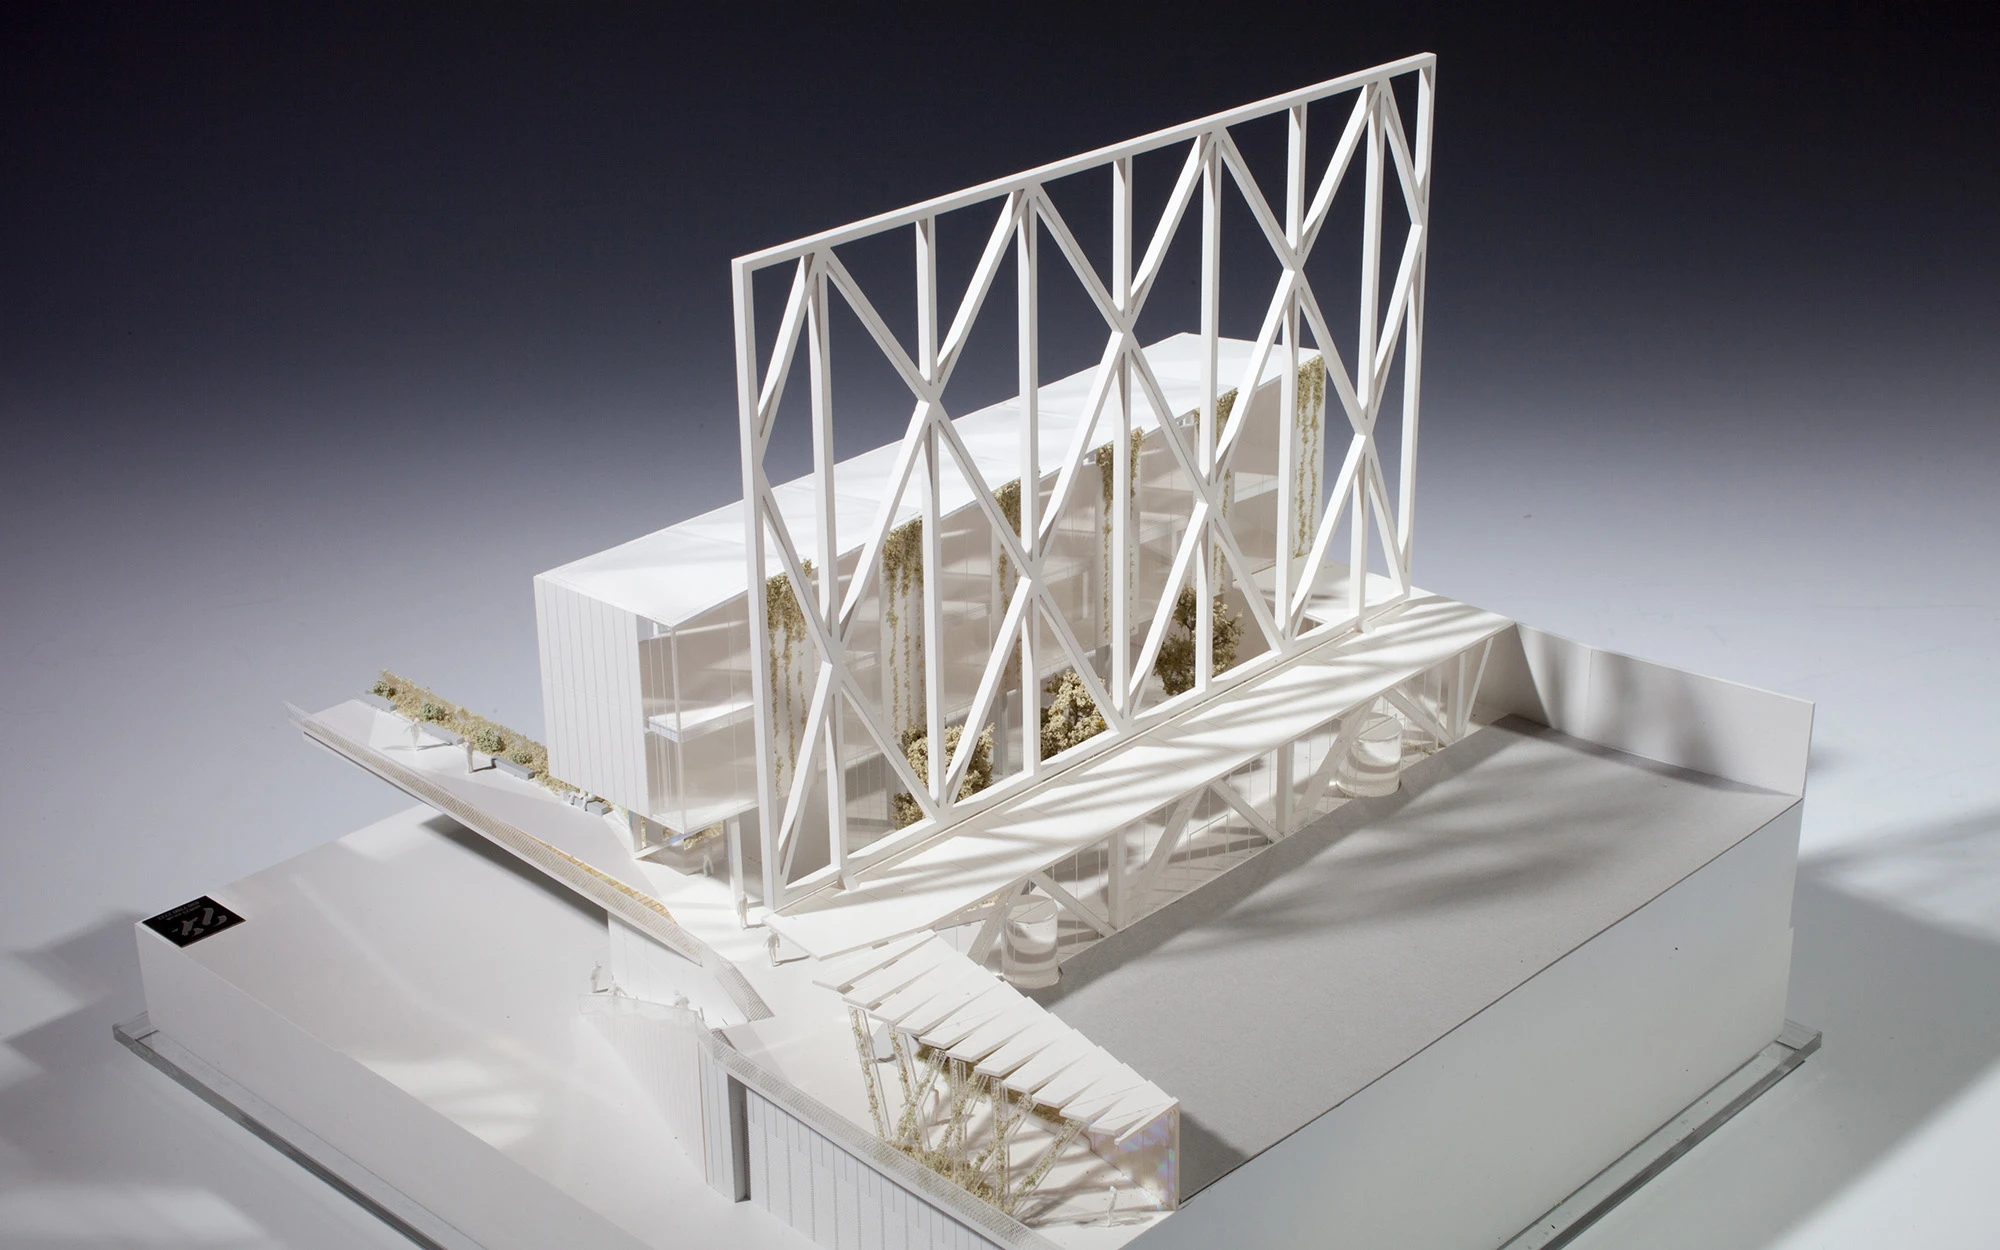 21 Moorfields architectural model